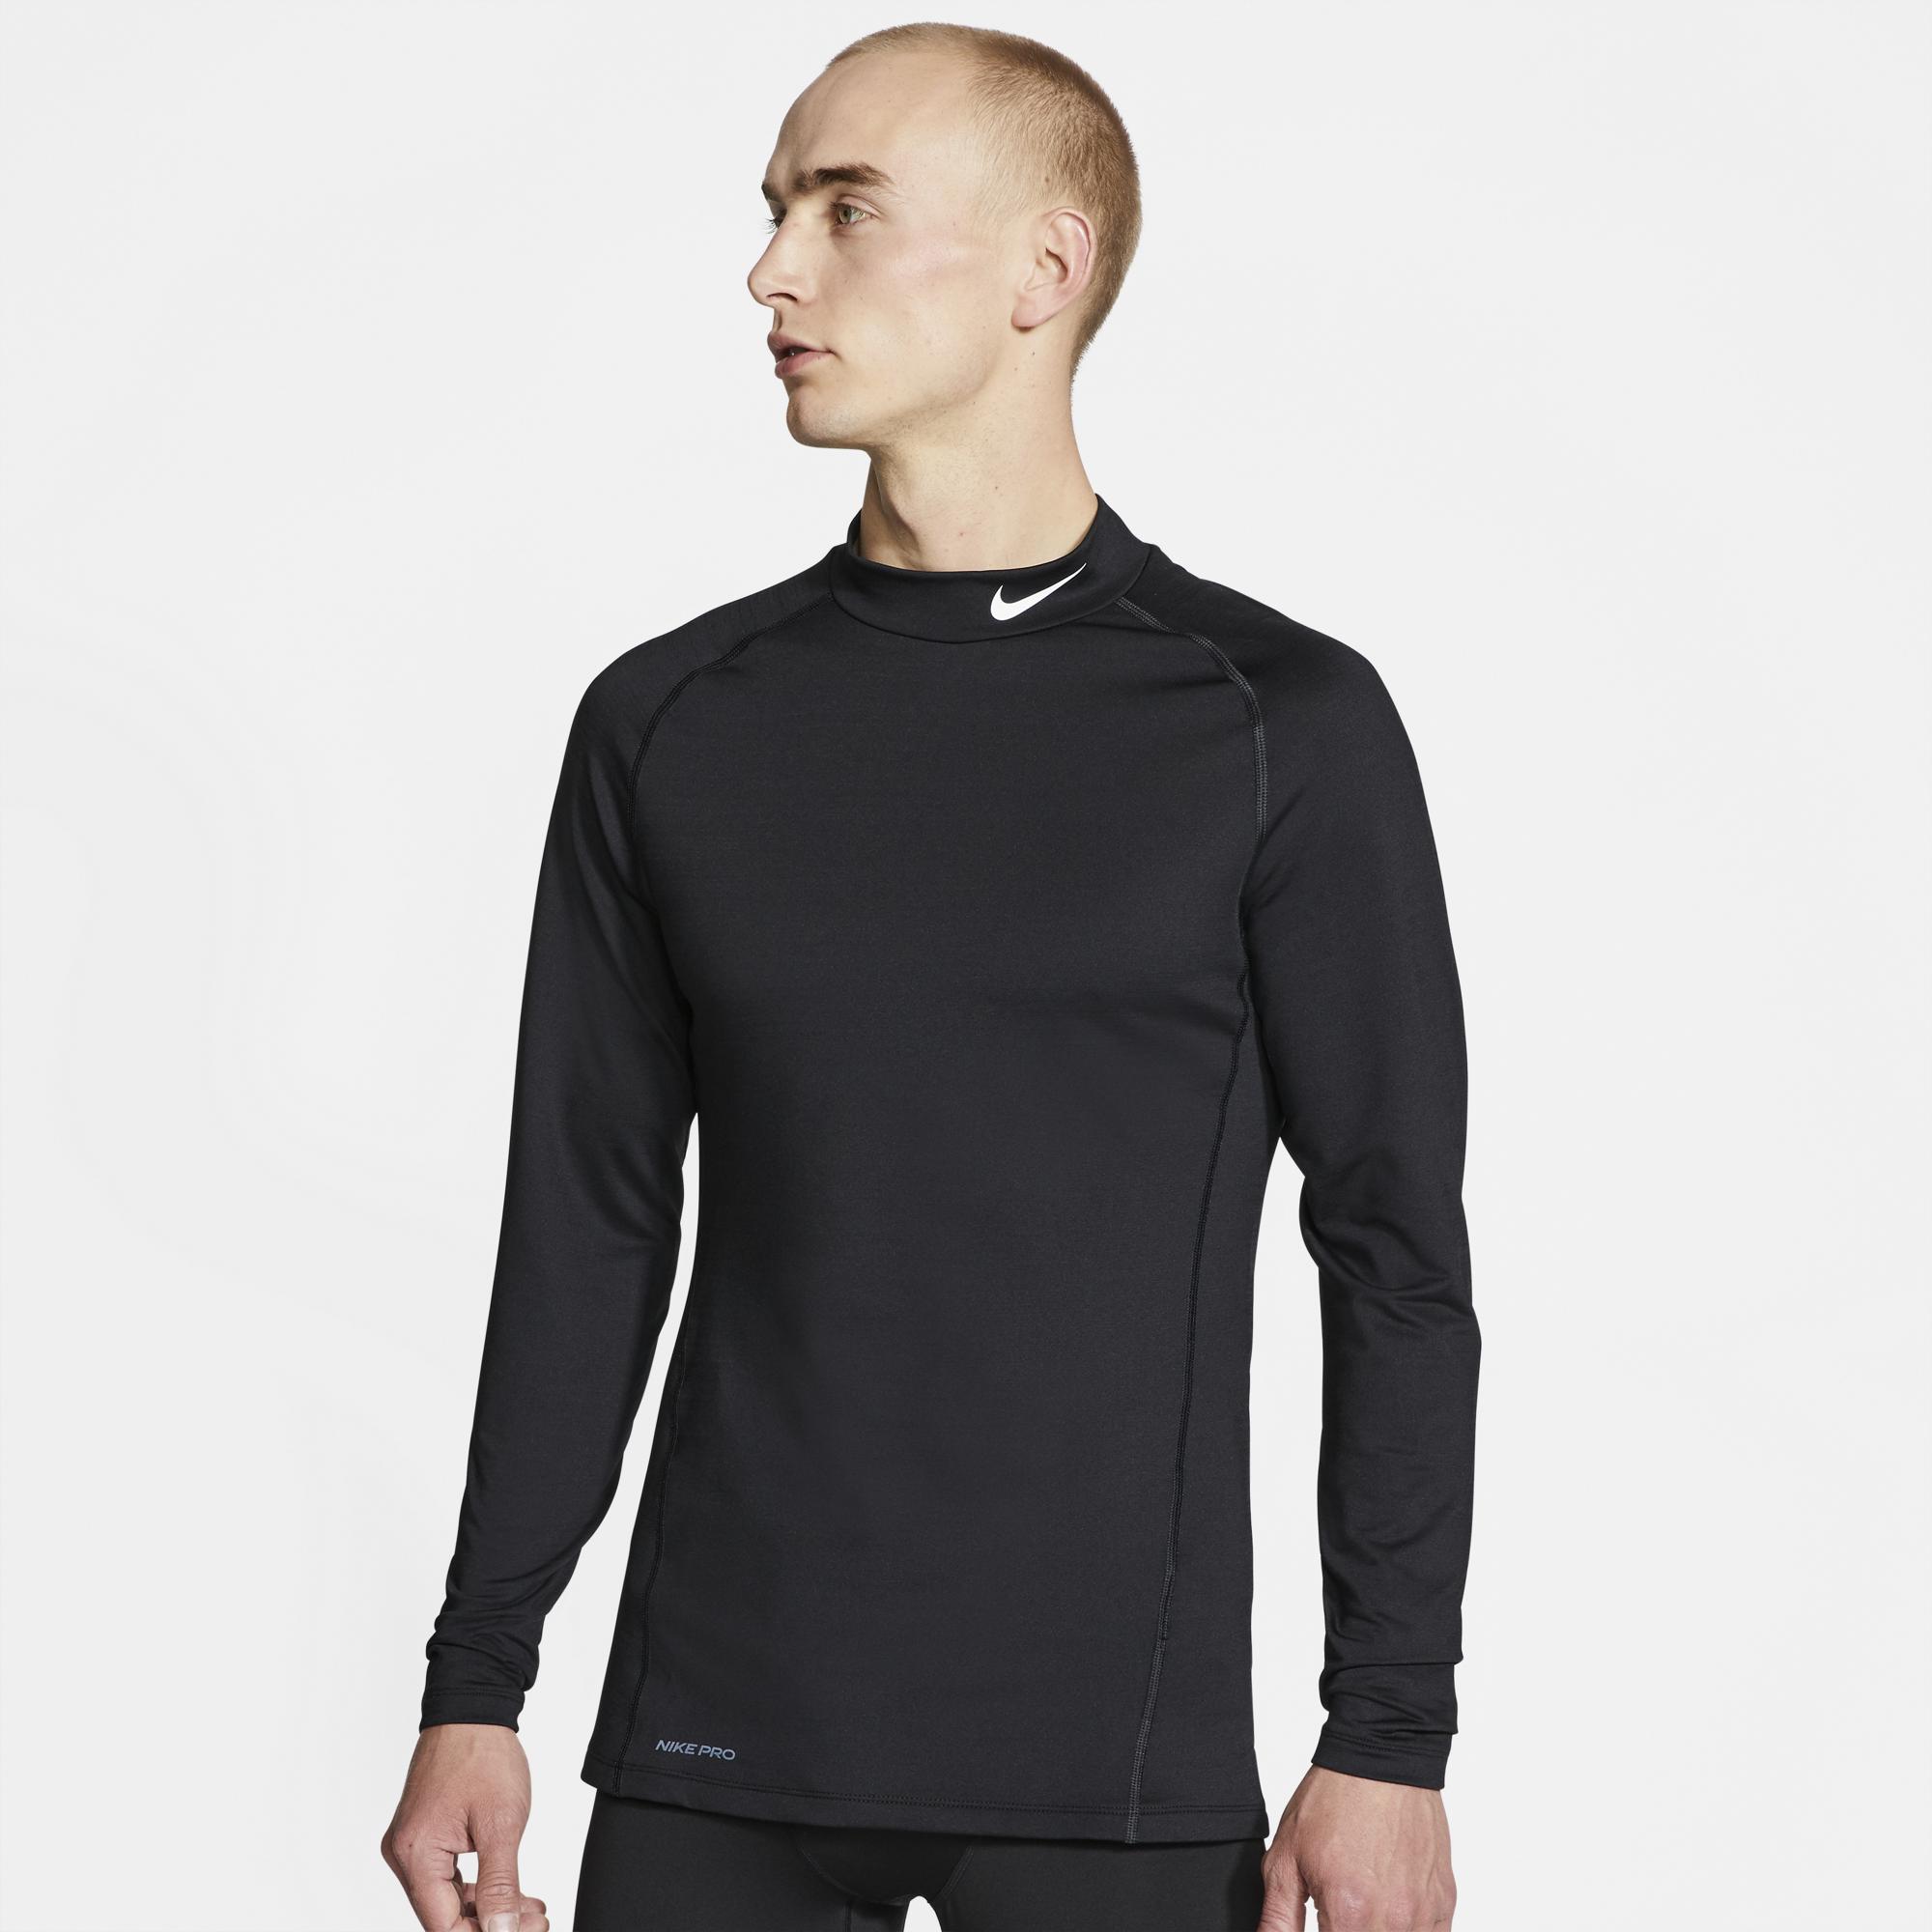 Nike Synthetic Pro Warm Compression Long Sleeve Mock in Black/White ...